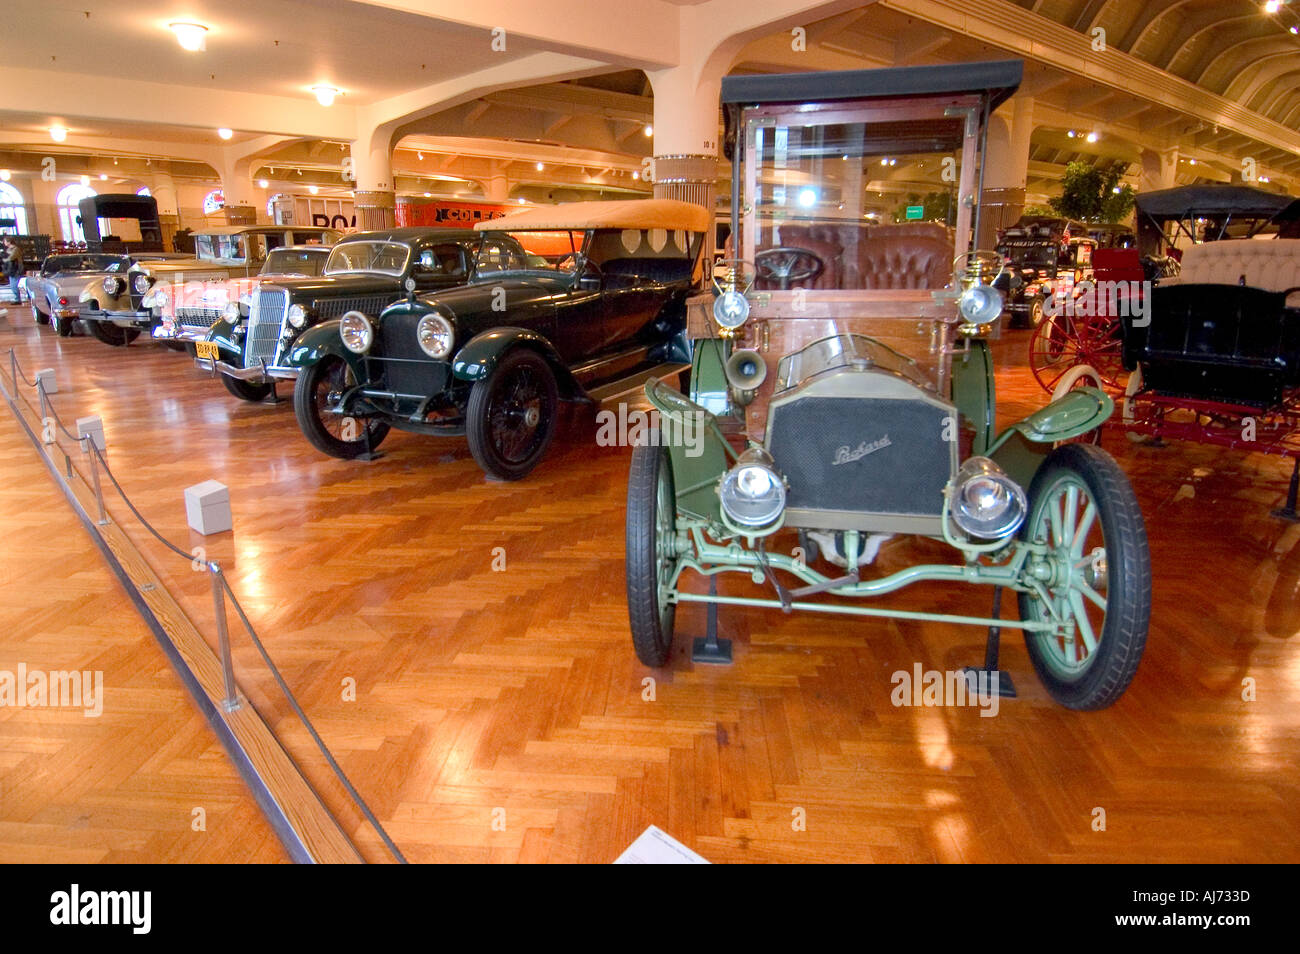 Henry Ford Museum at Greenfield Village Dearborn Michigan featuring a vintage ford automobile Stock Photo